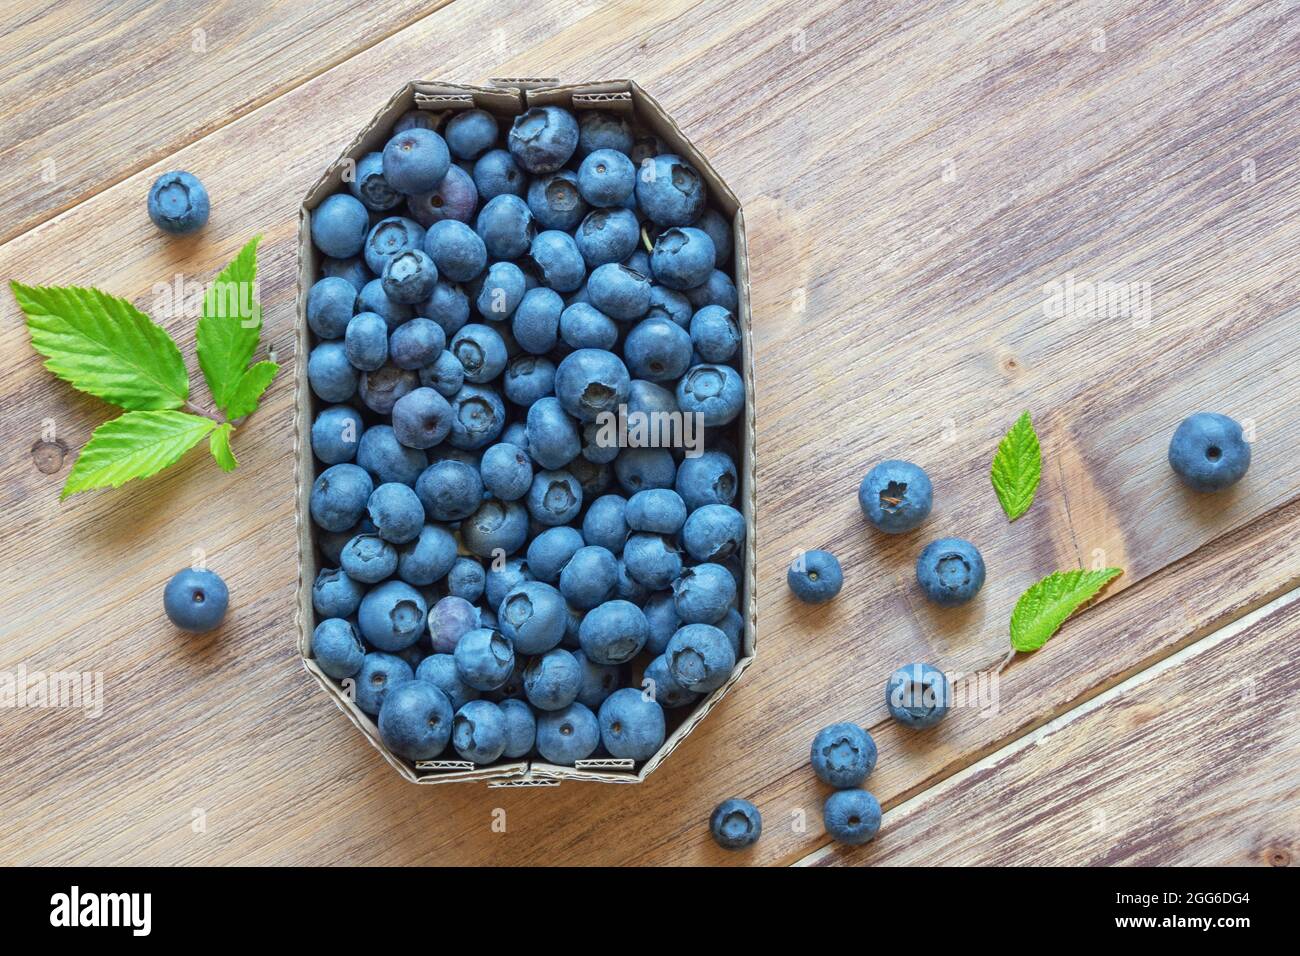 Blueberry in cardboard box from market. Flat lay, free space for text Stock Photo